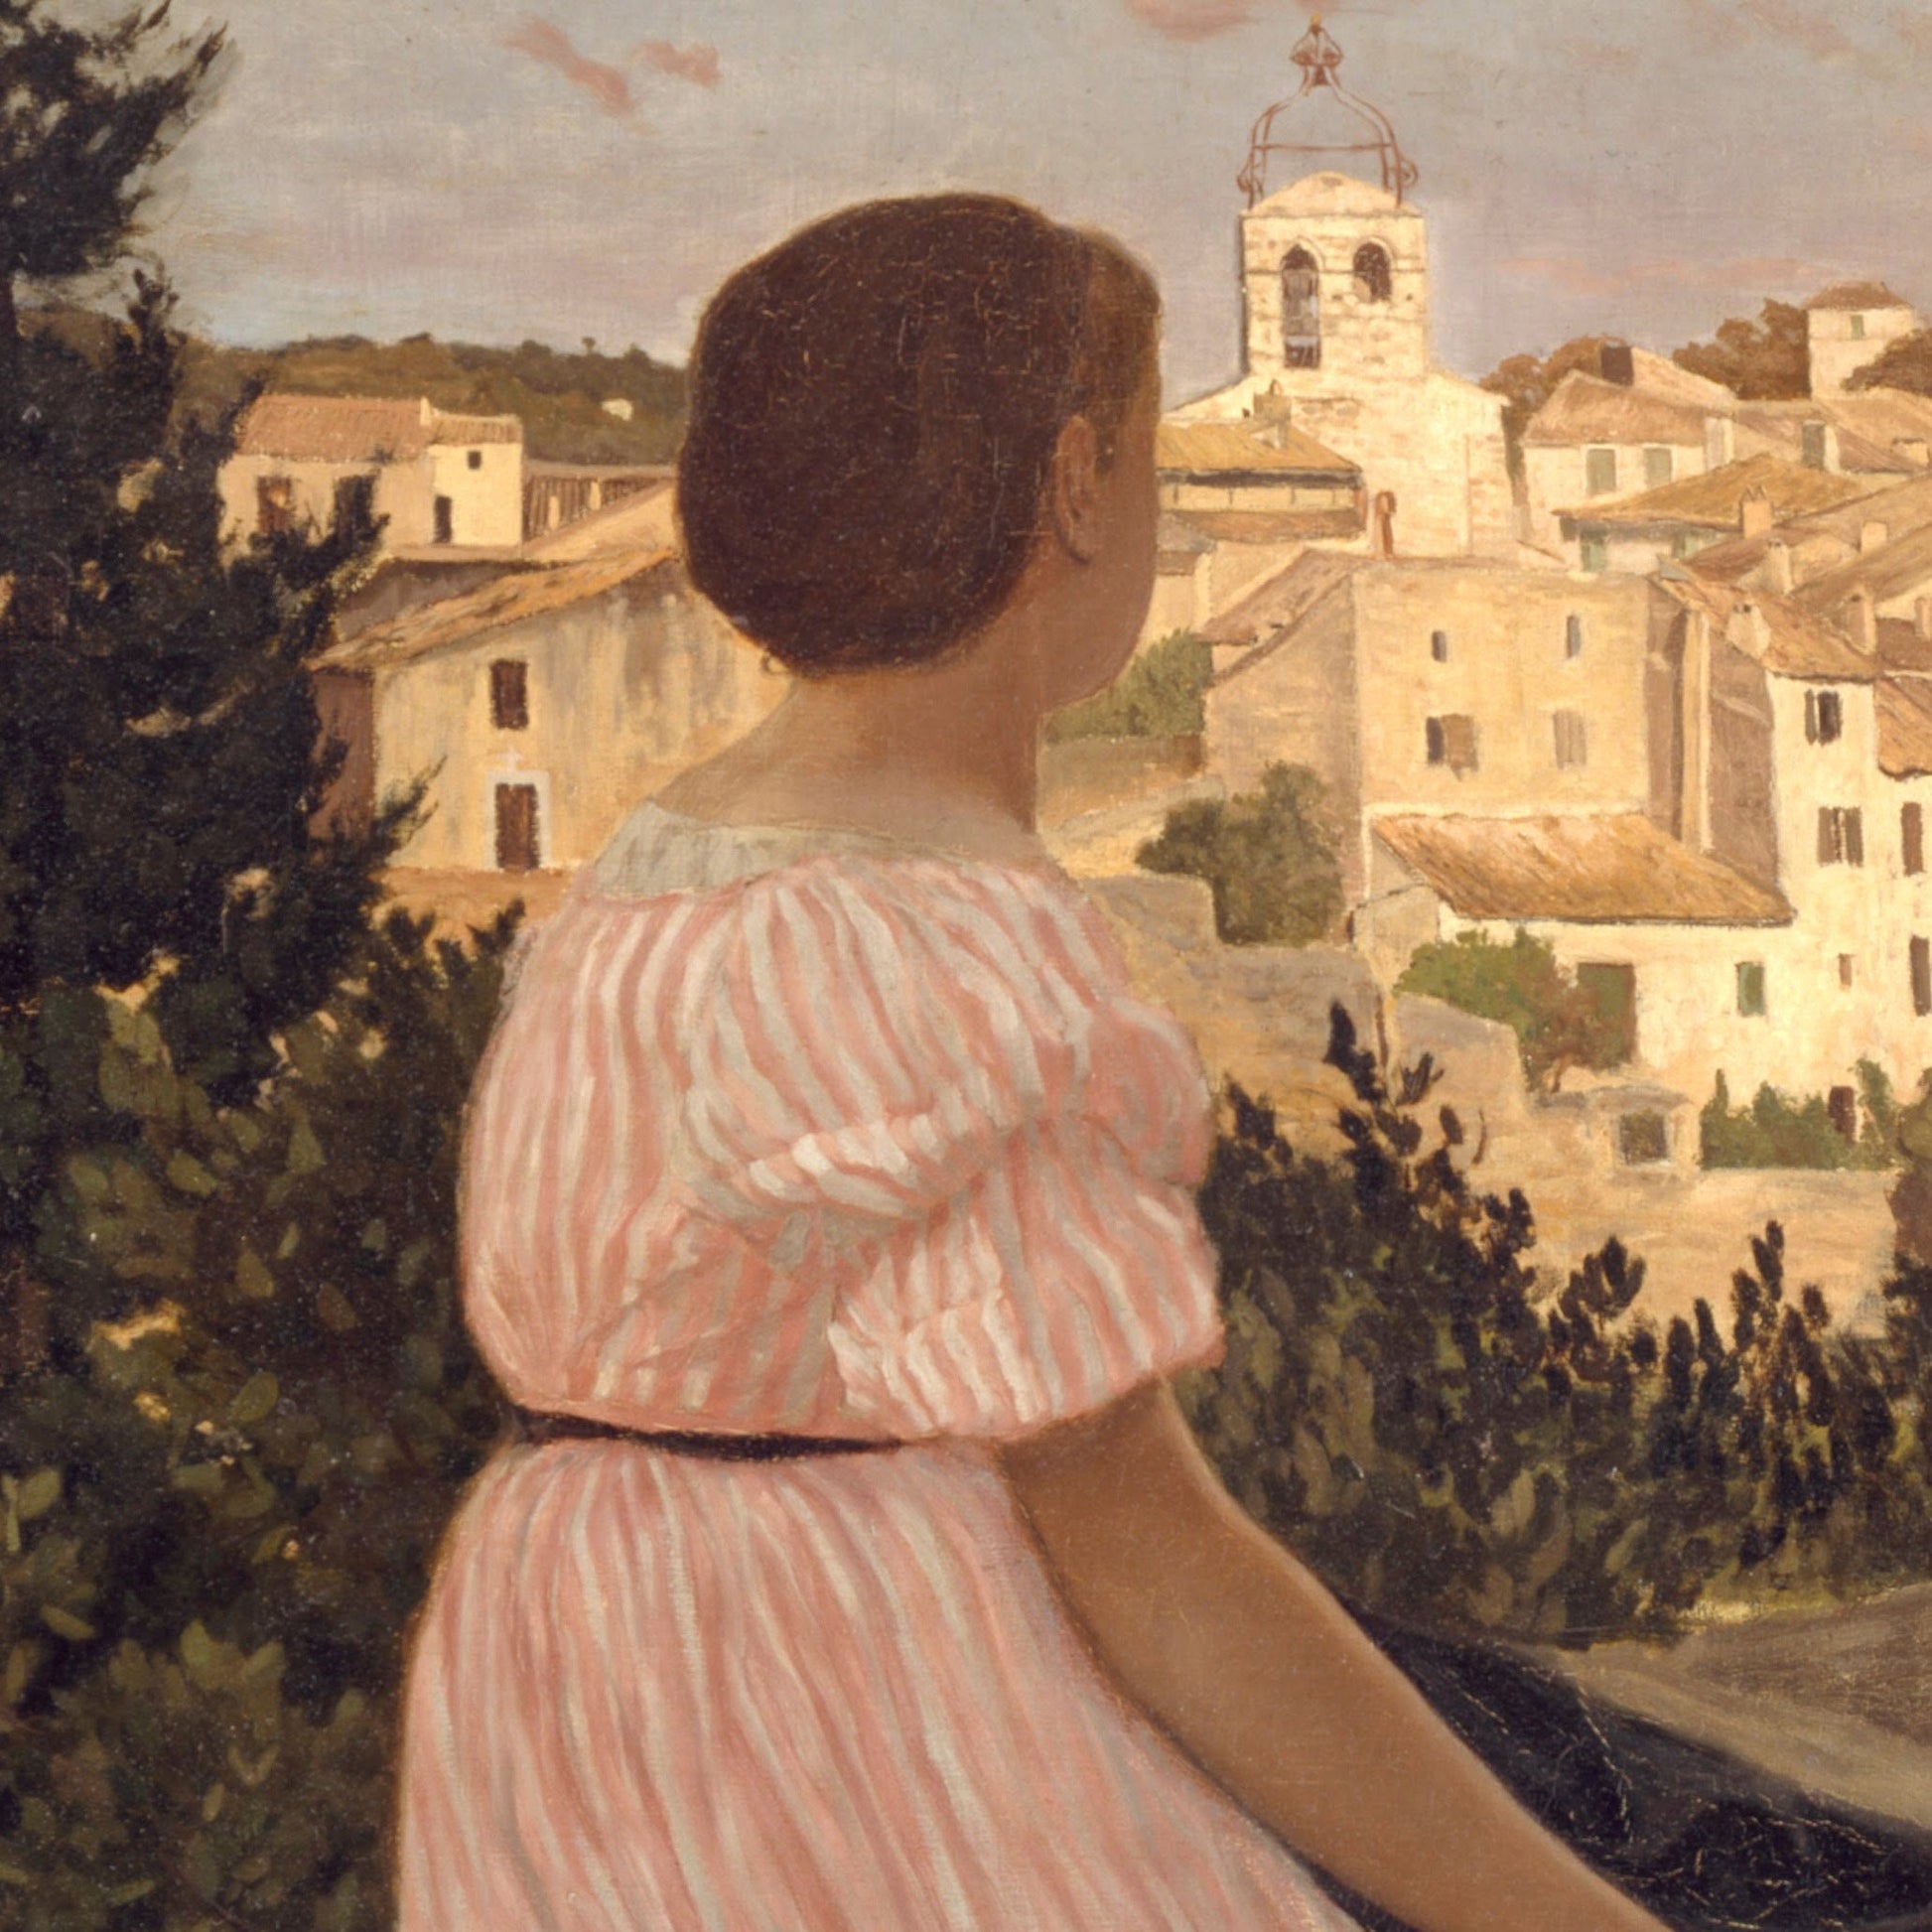 The Pink Dress by Frédéric Bazille, 3d Printed with texture and brush strokes looks like original oil-painting, code:406